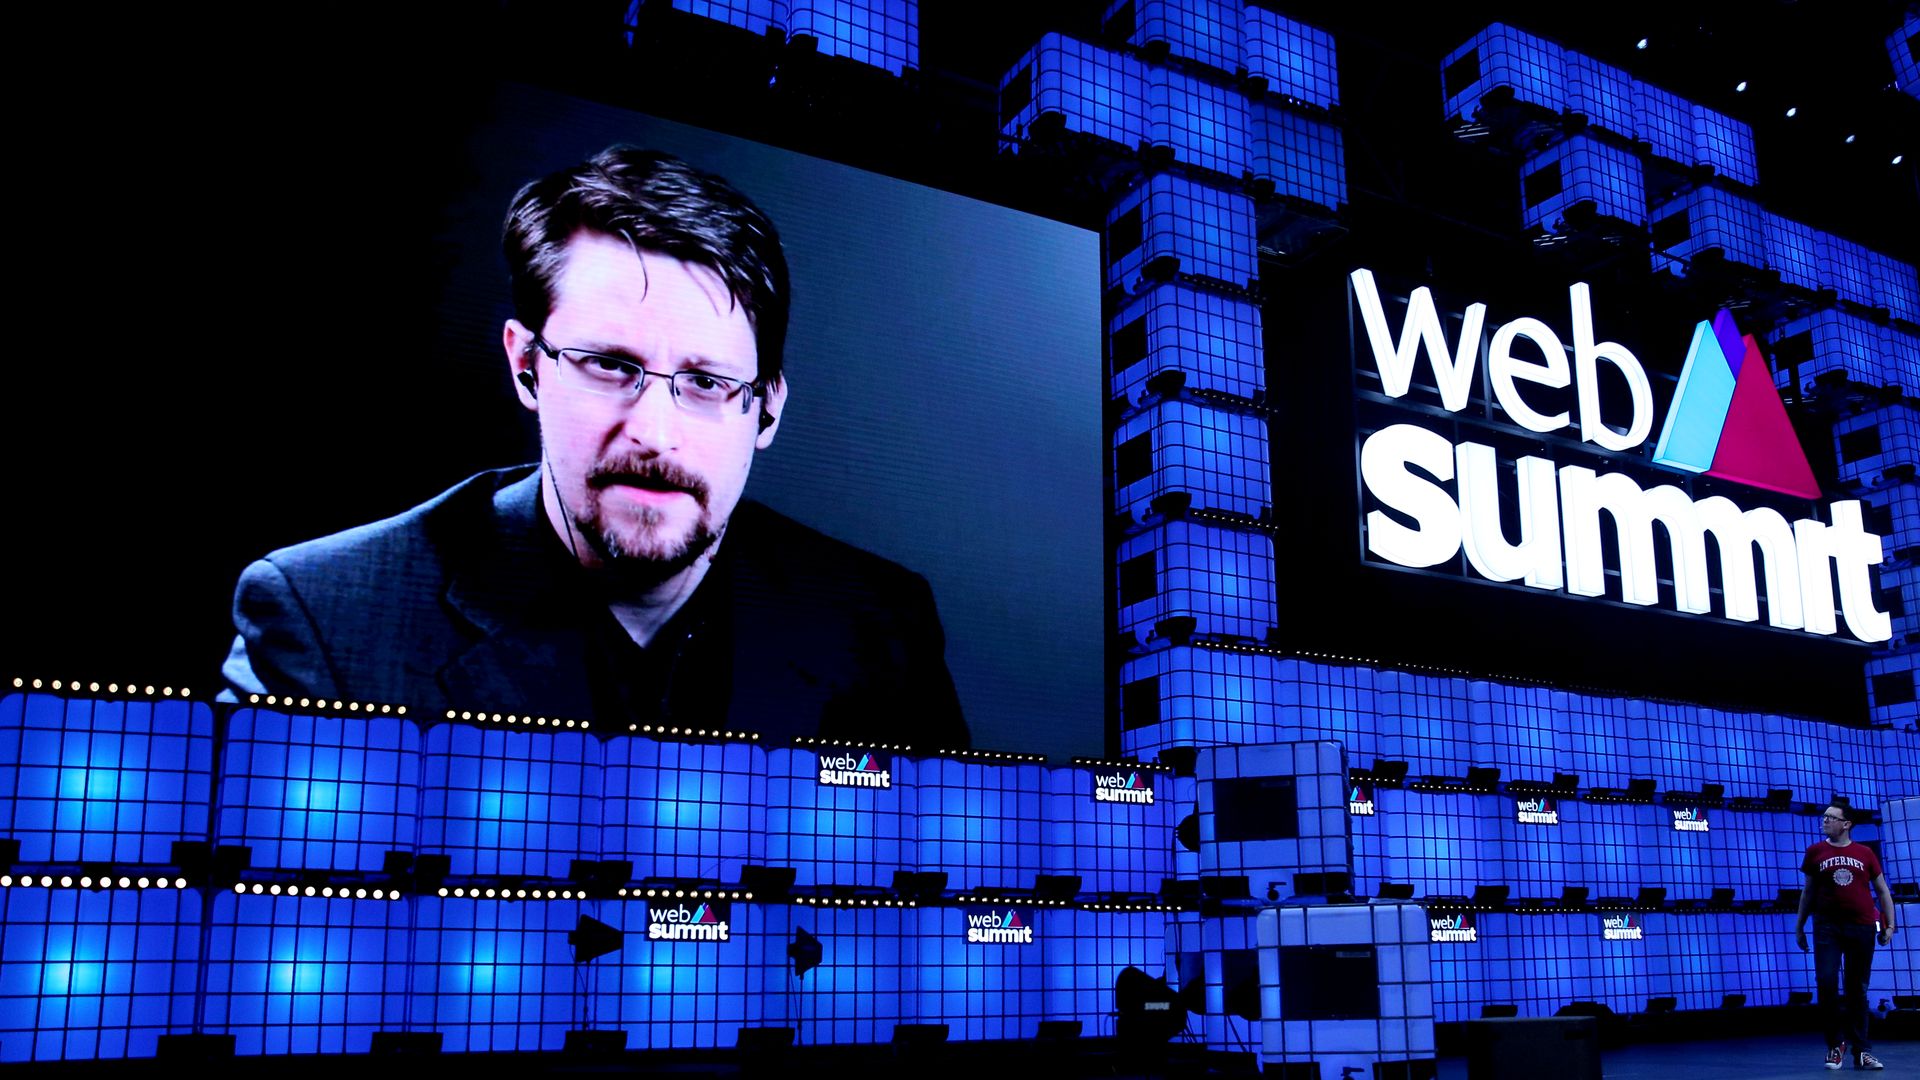 Snowden is picture on a screen next to the Web Summit logo 